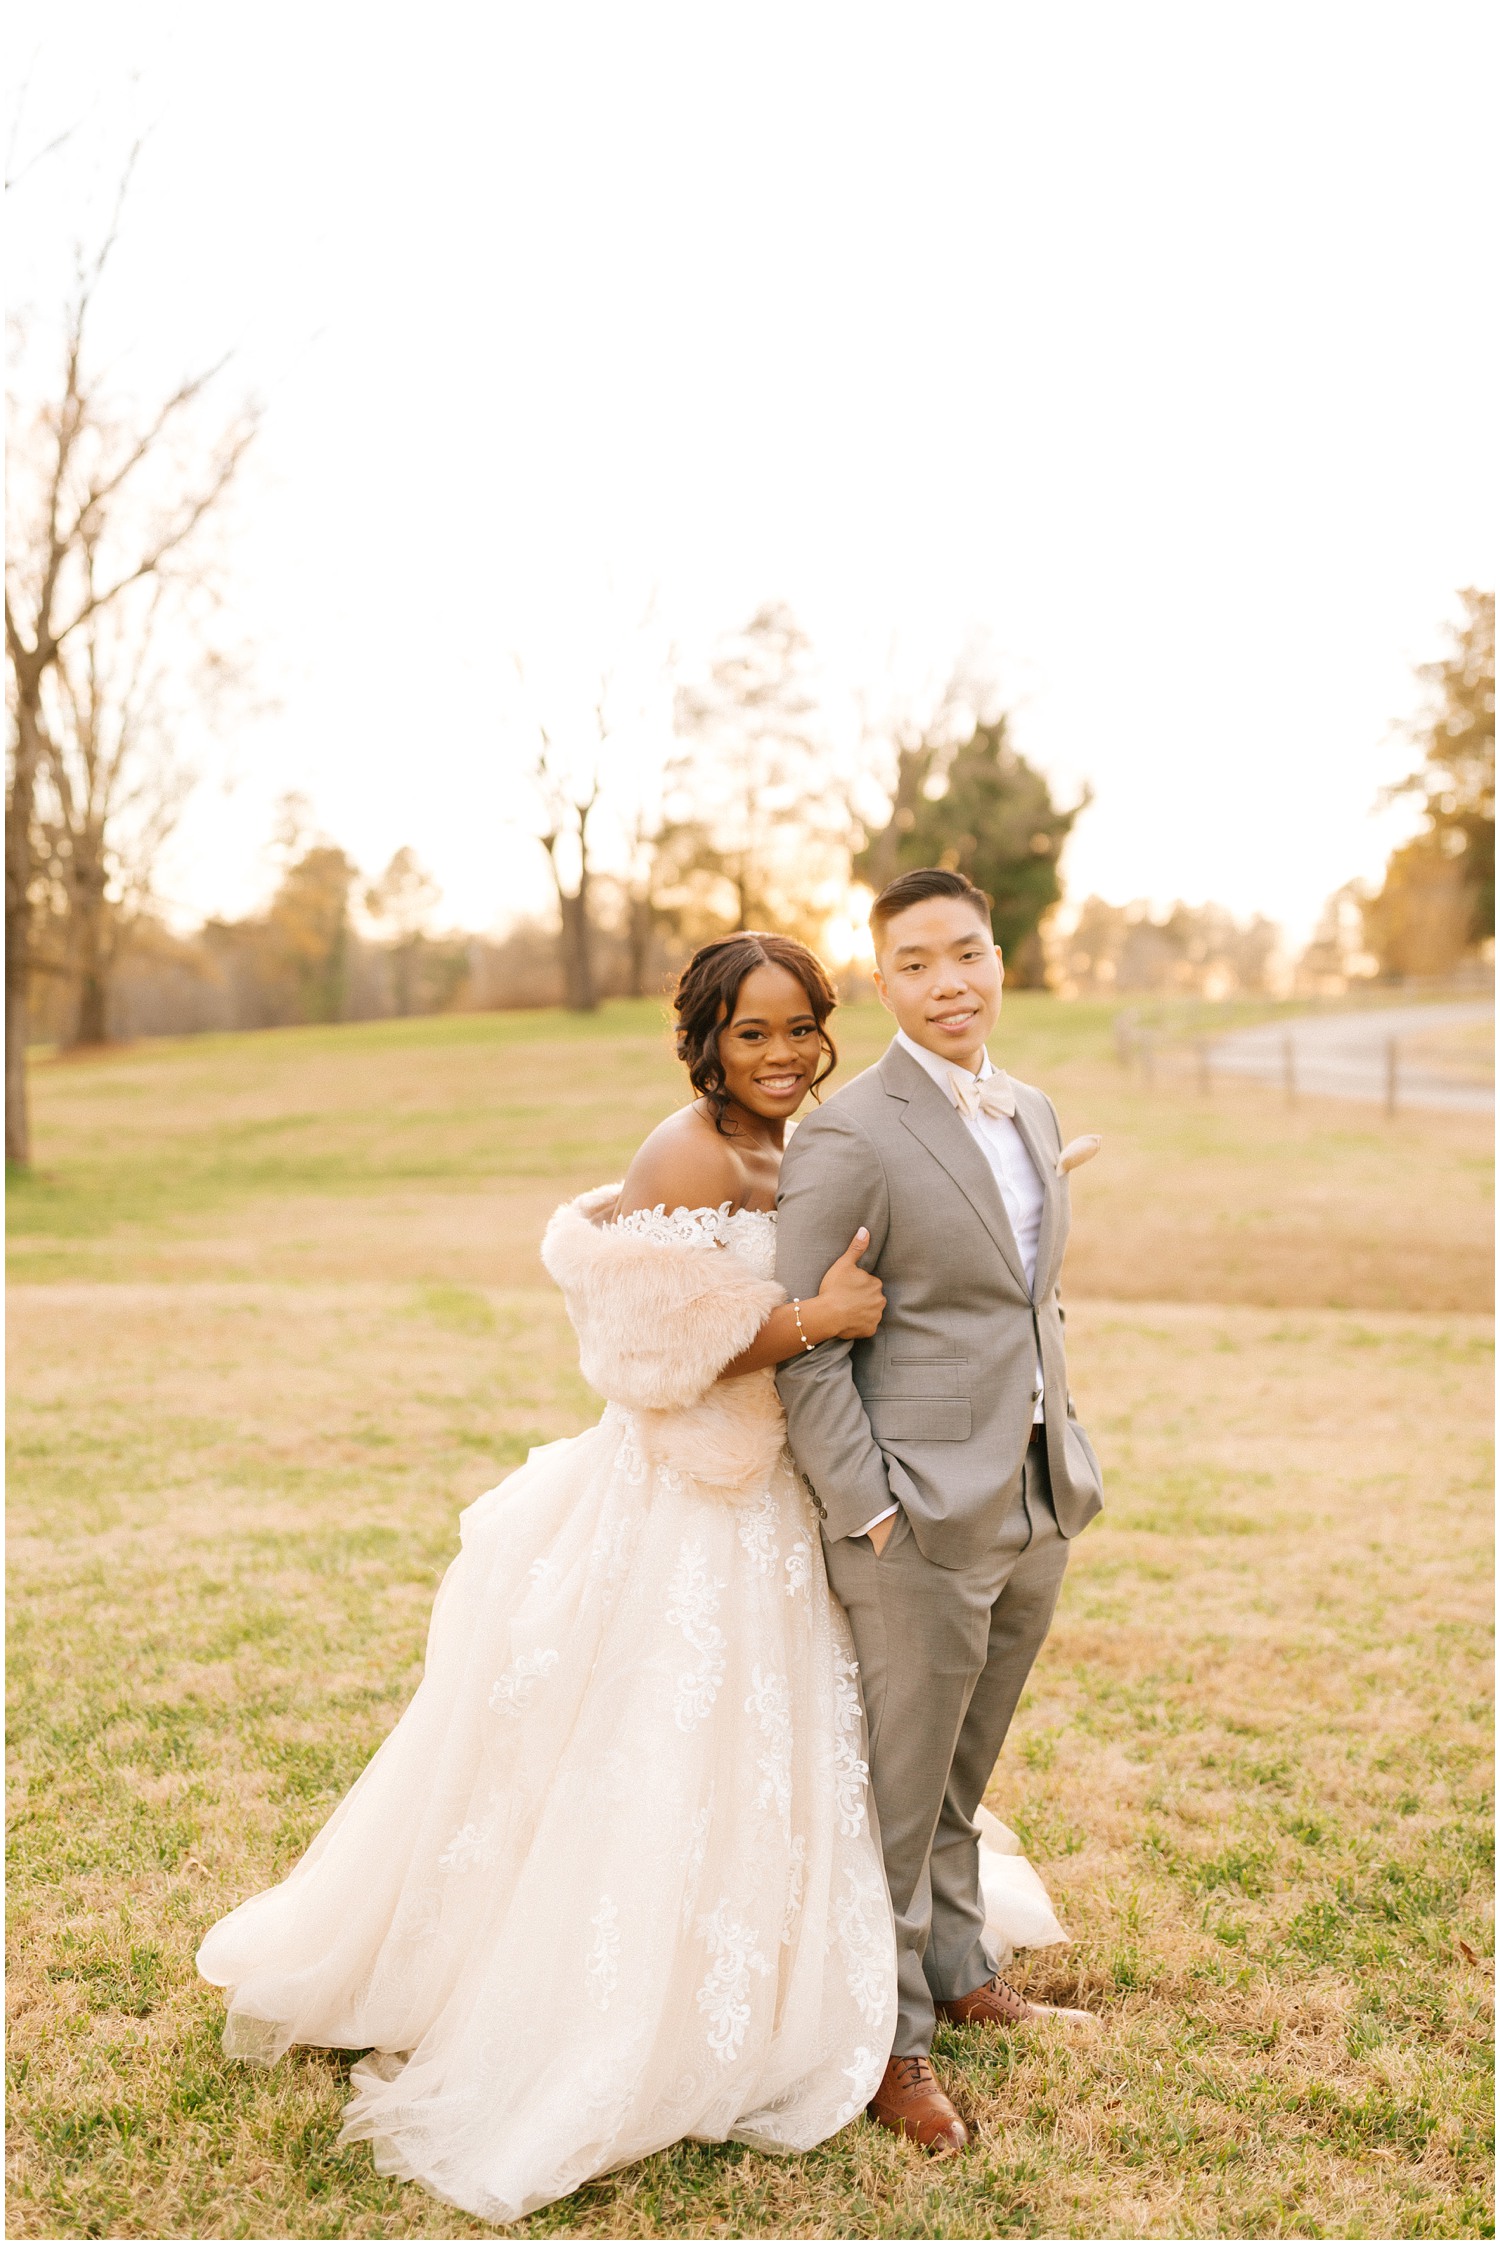 Classic portrait of a couple on their wedding day in Raleigh, NC.